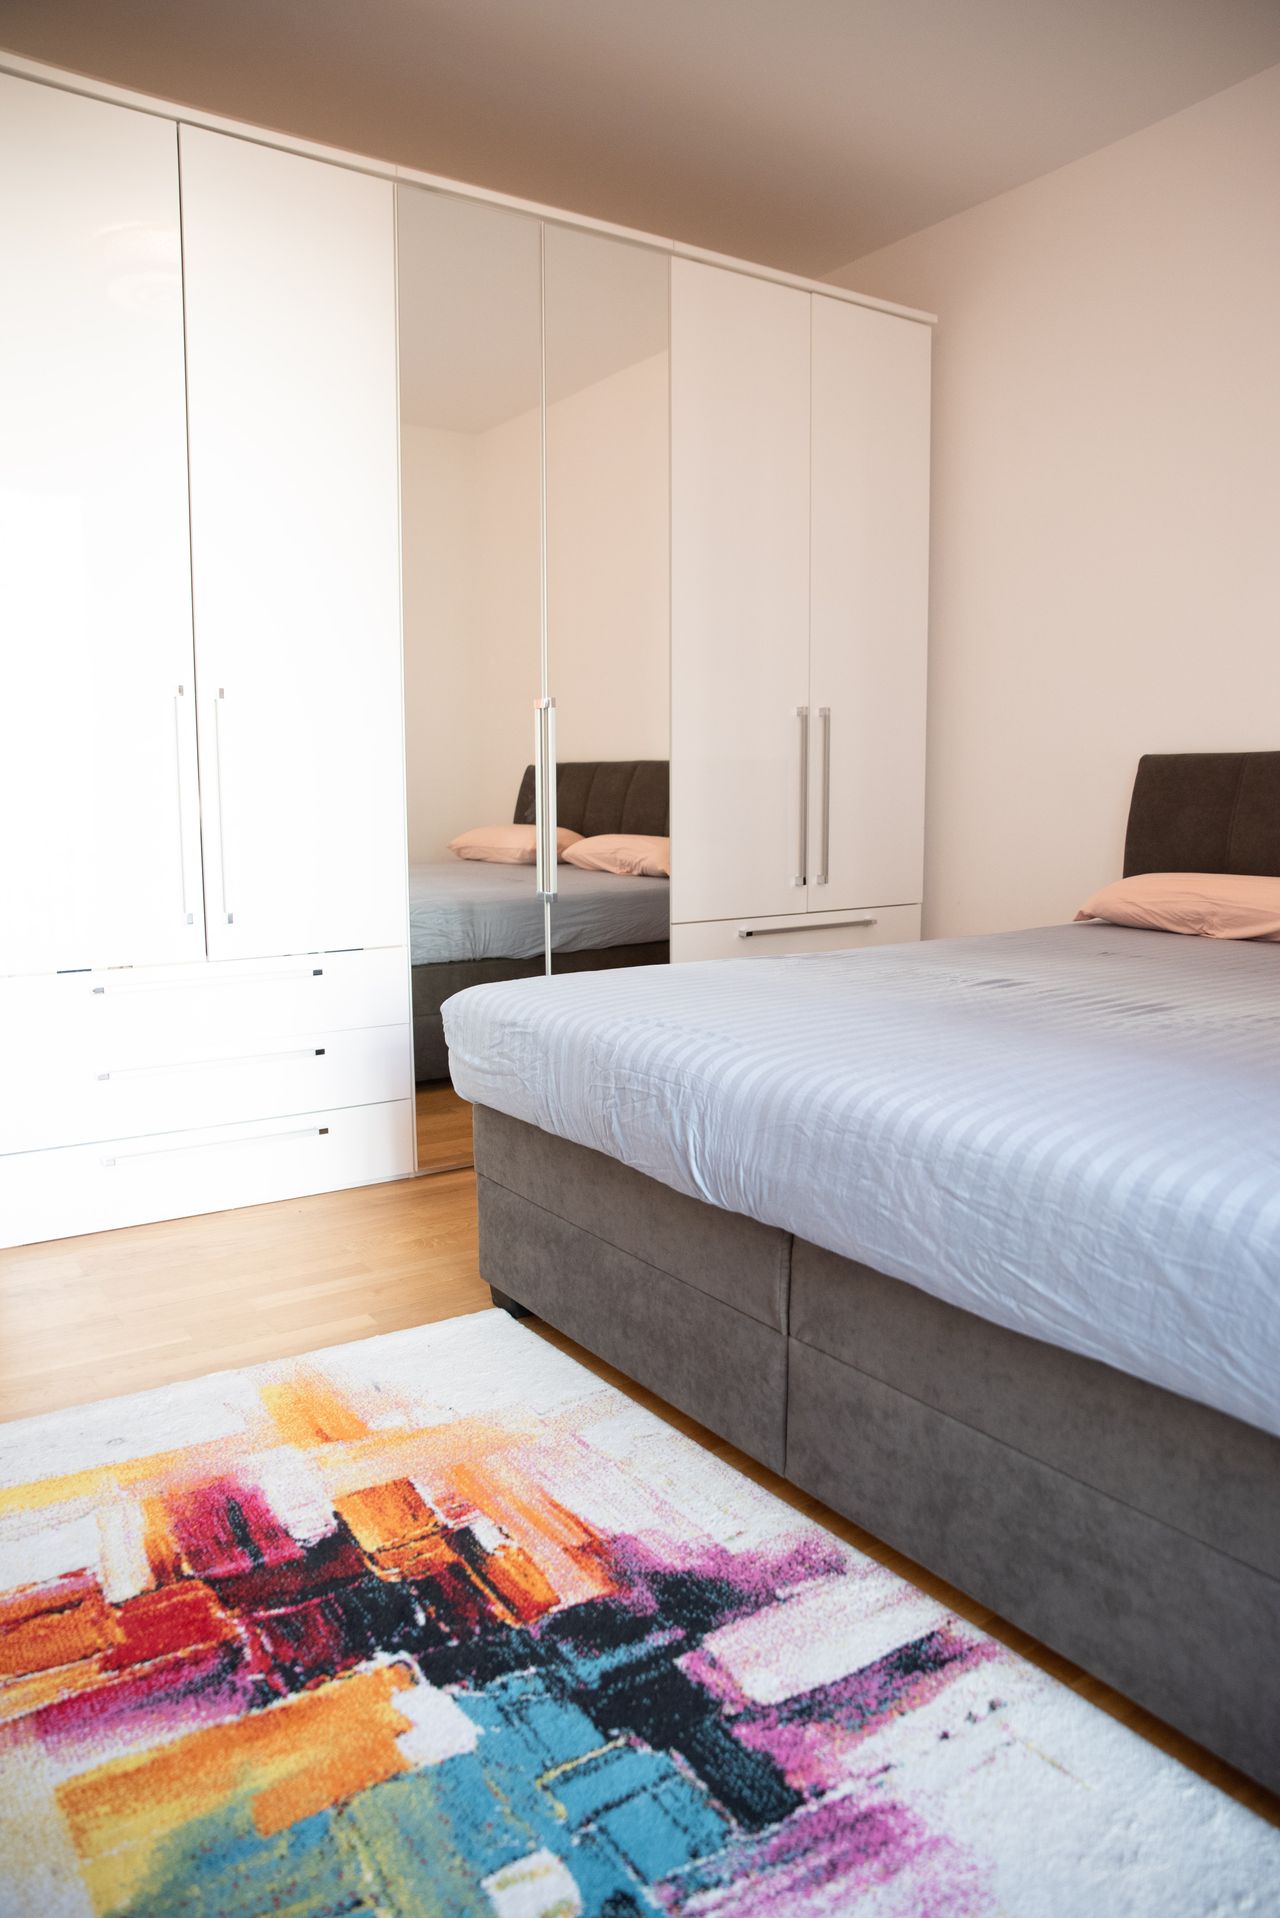 Bright Fully Furnished Apartment for Rent - Your Perfect Urban Retreat!